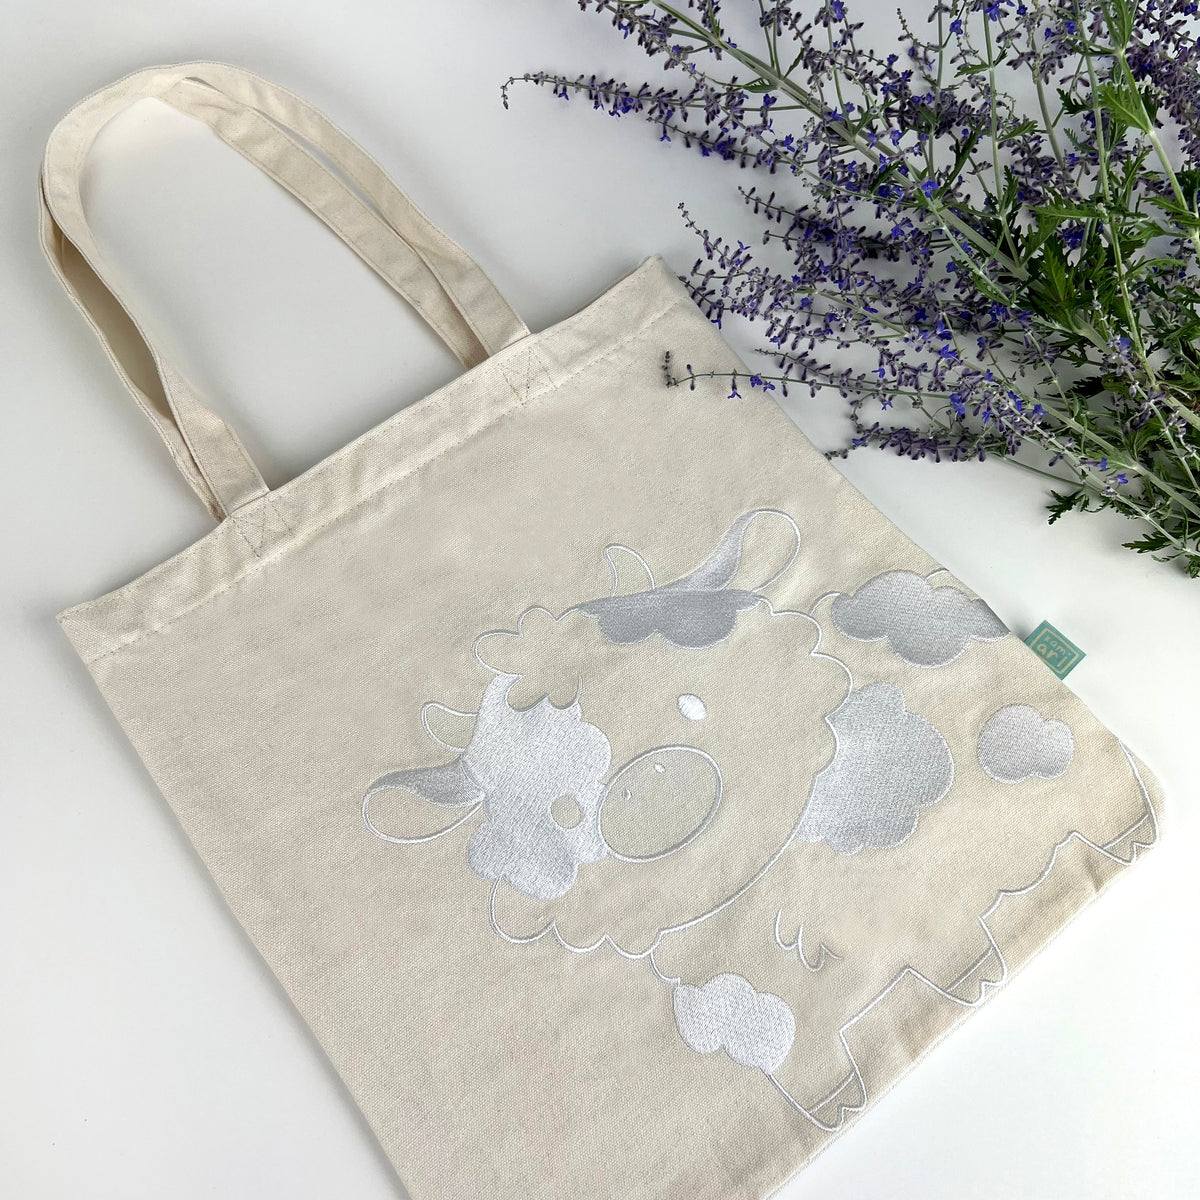 Embroidered Fluffy Cow Tote Bag